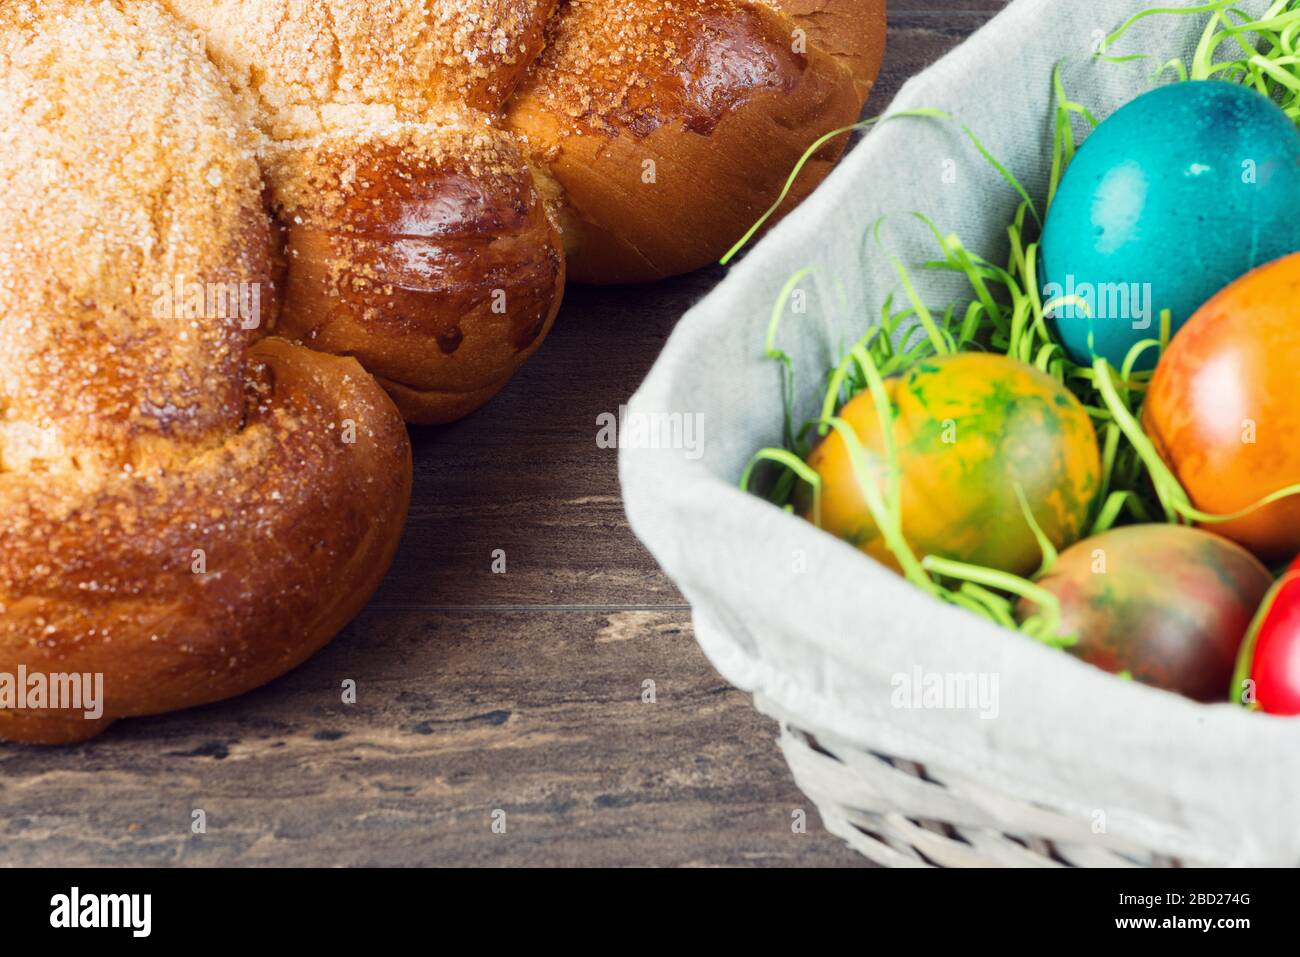 Easter wicker basket with colored eggs and Easter bread on grey wooden board. Stock Photo